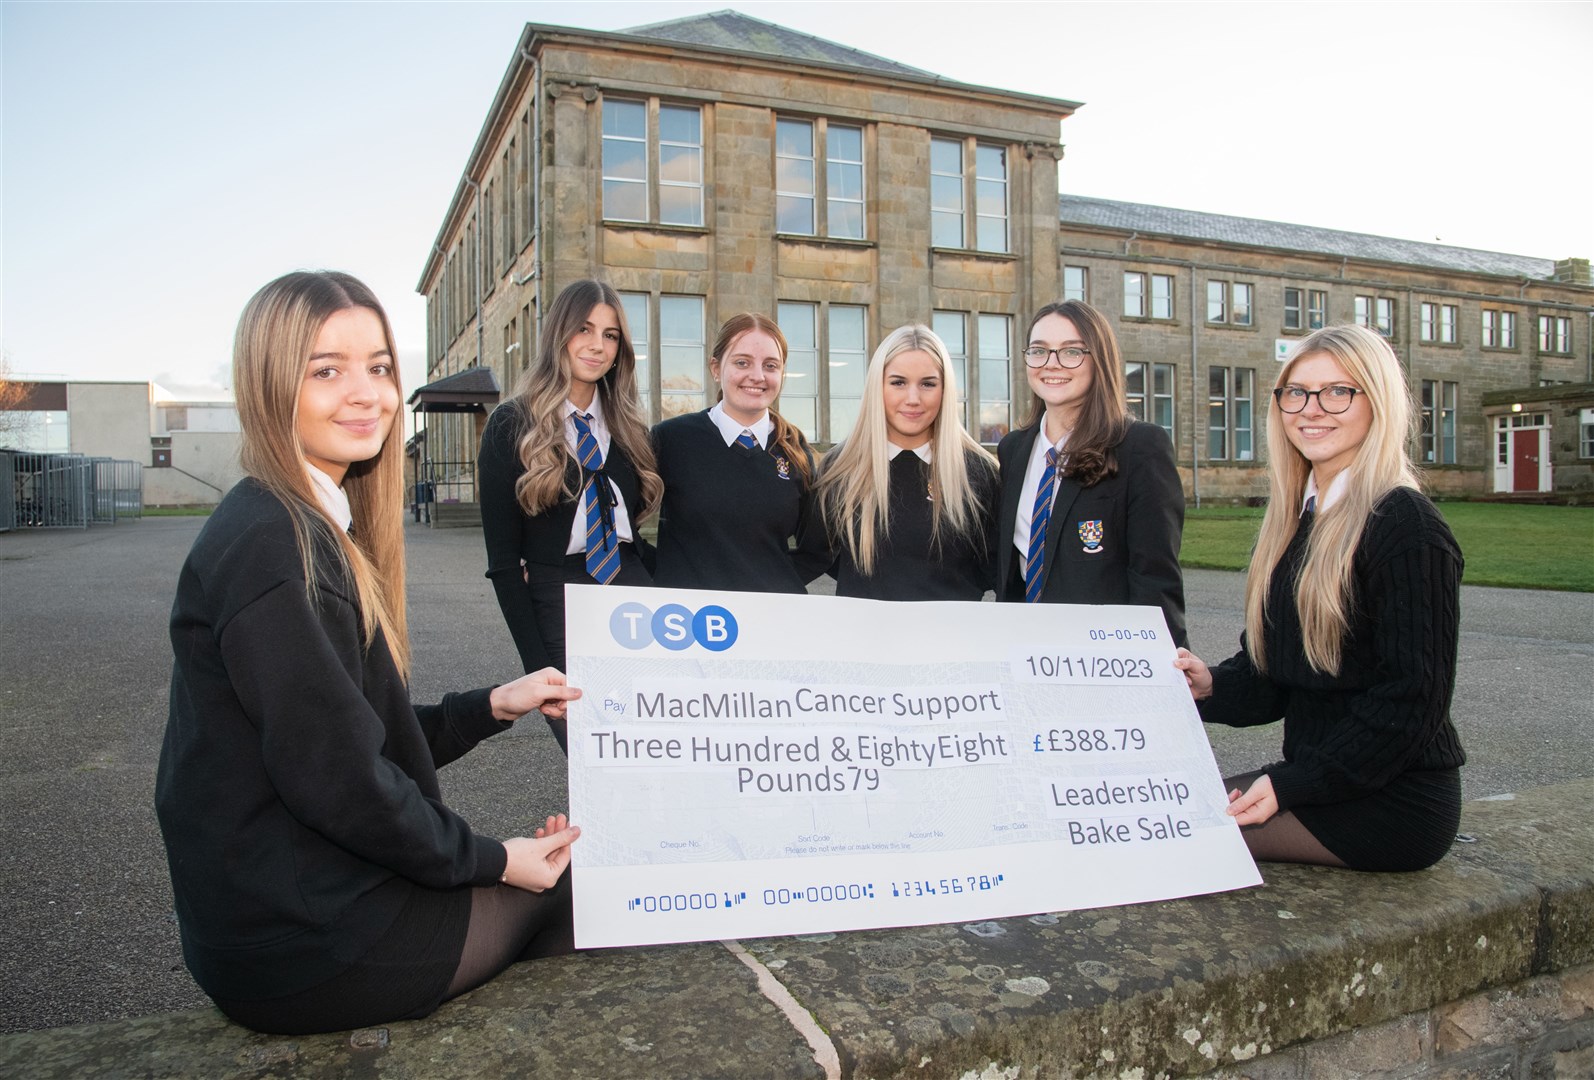 Showing off the fruit of their baking labours in the form of a cheque to Macmillan Cancer Support are (from left) Makenna Gauld, Eden Wojcik, Layla Calder, Natasha Gillies, Abbie Phimister and Phoebe Goodall. Picture: Daniel Forsyth